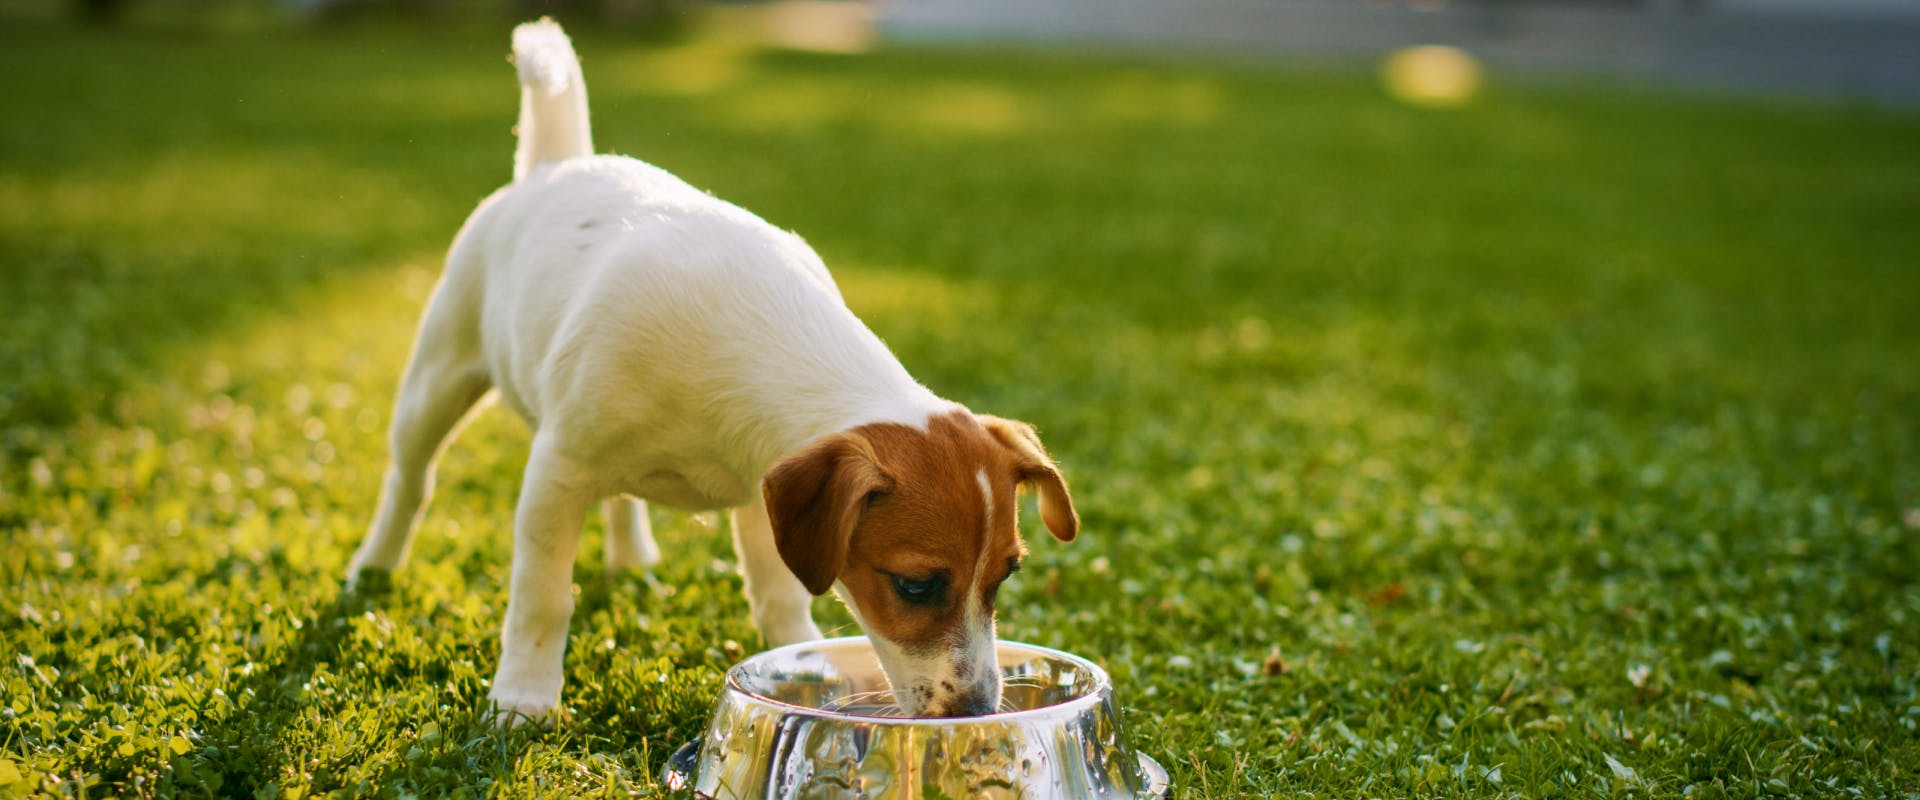 small jack russell drinking from a water bowl on some grass in the sun